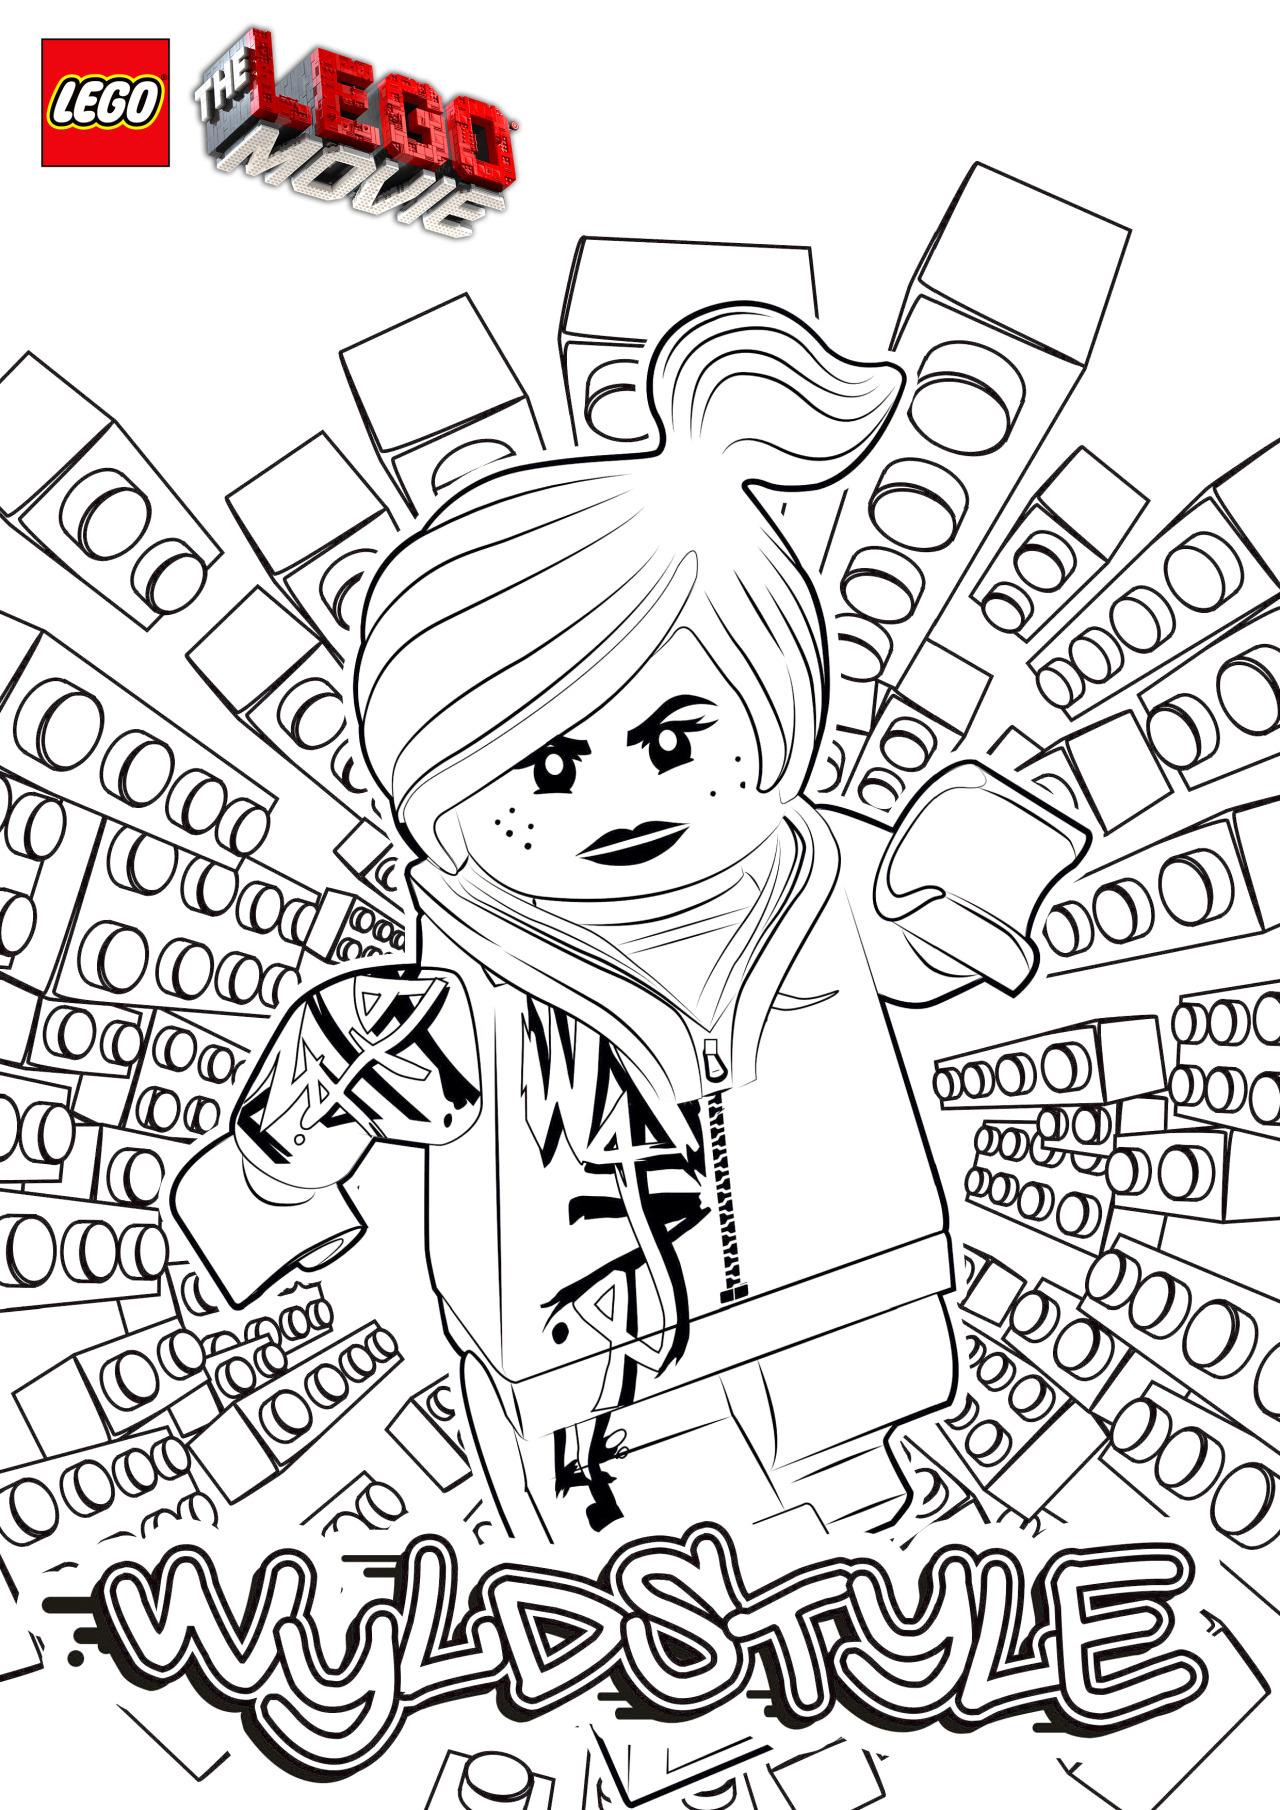 New Lego Movie Characters Coloring Pages for Adult